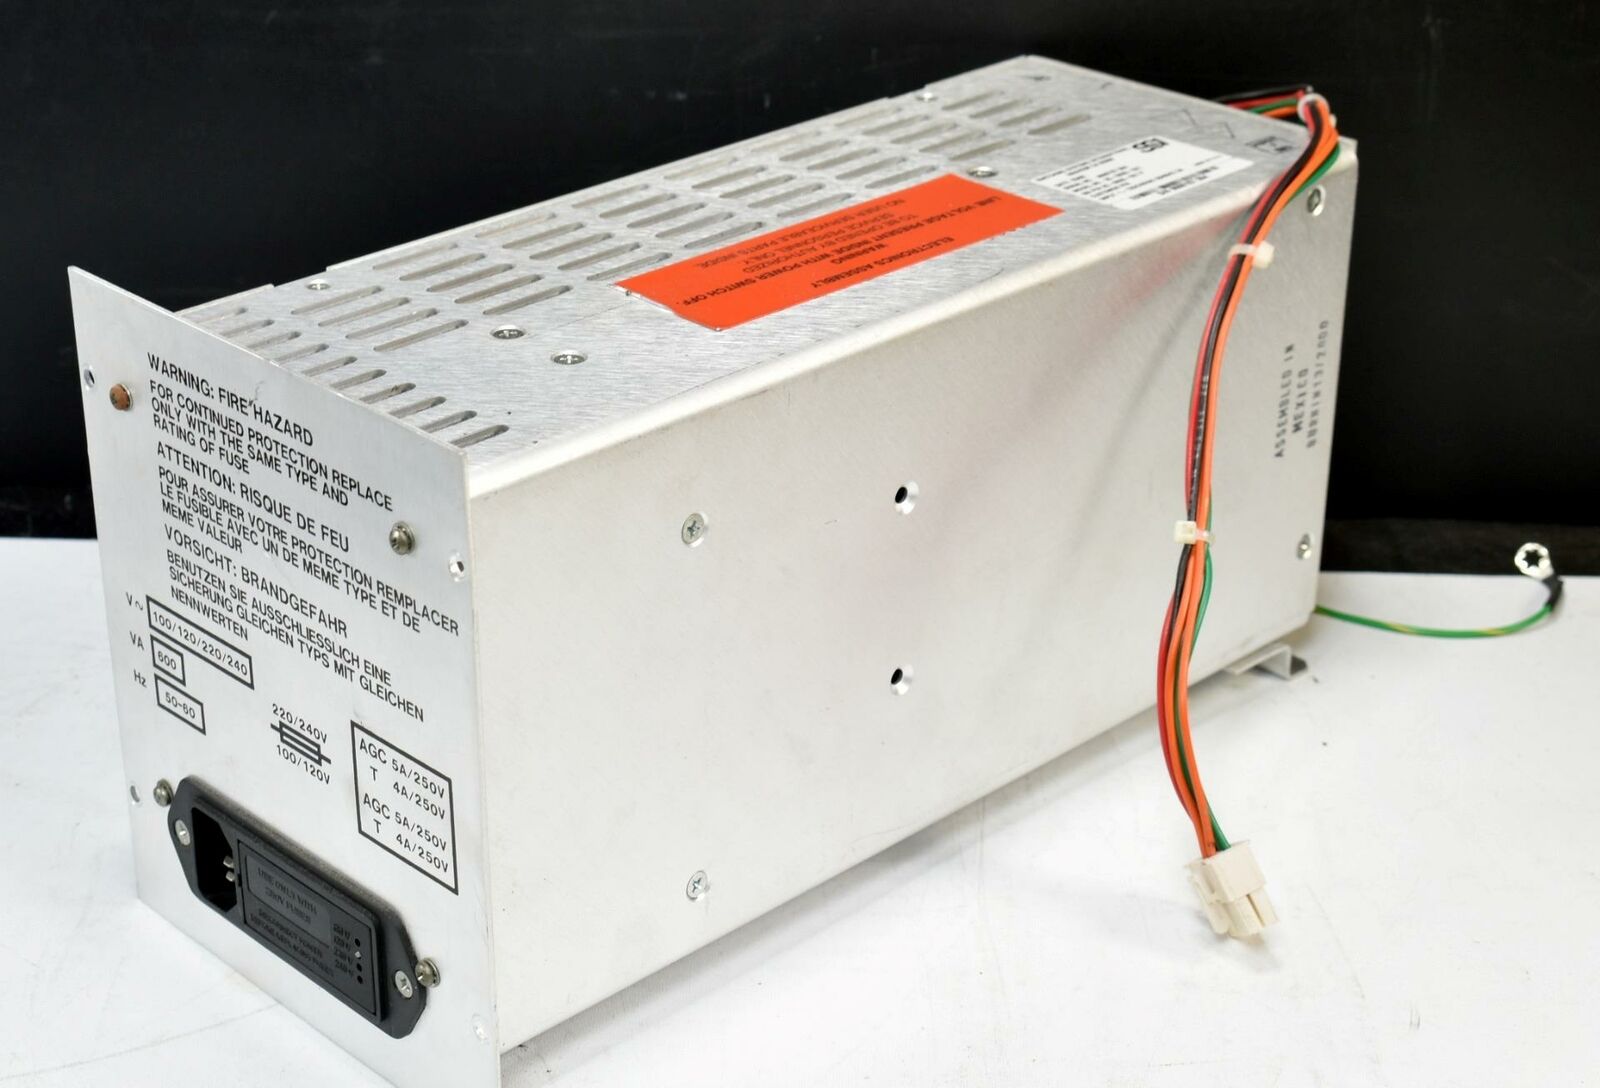 SSI , SWITCHING SYSTEMS INTERNATIONAL 20-0028-021 Power Supply